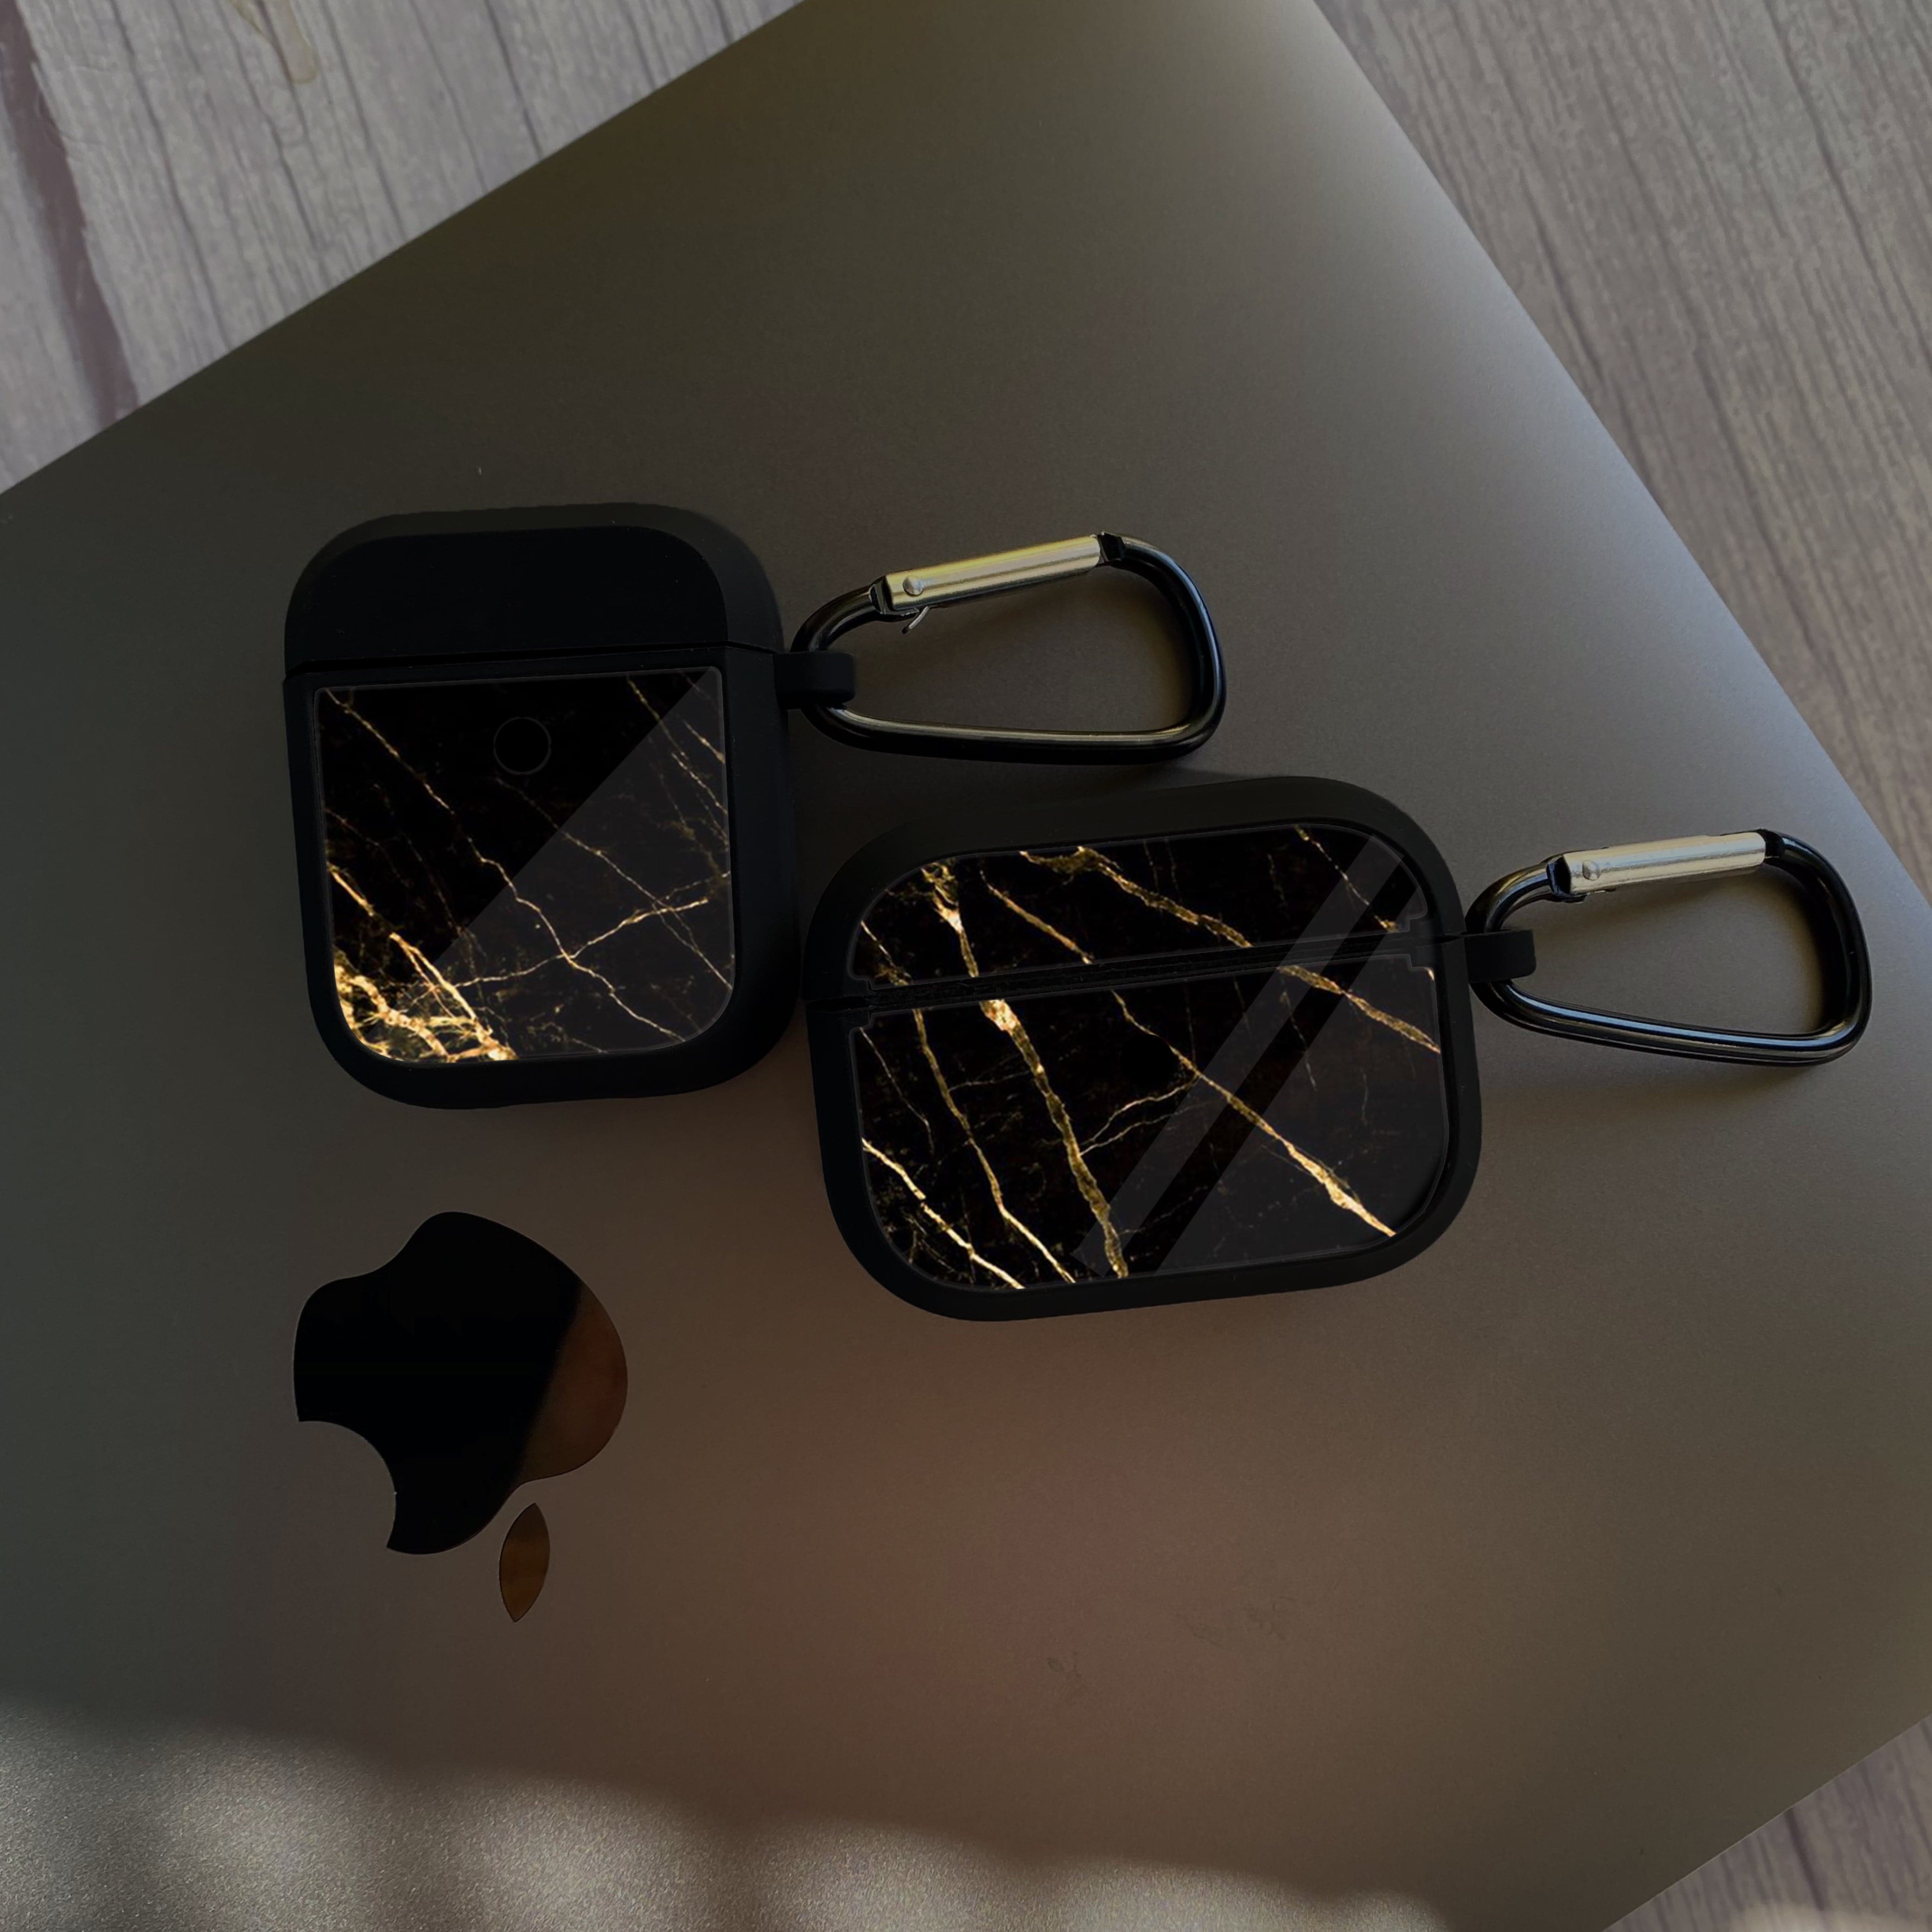 Apple Airpods Case - Black Marble Series 07 - Premium Print with holding clip